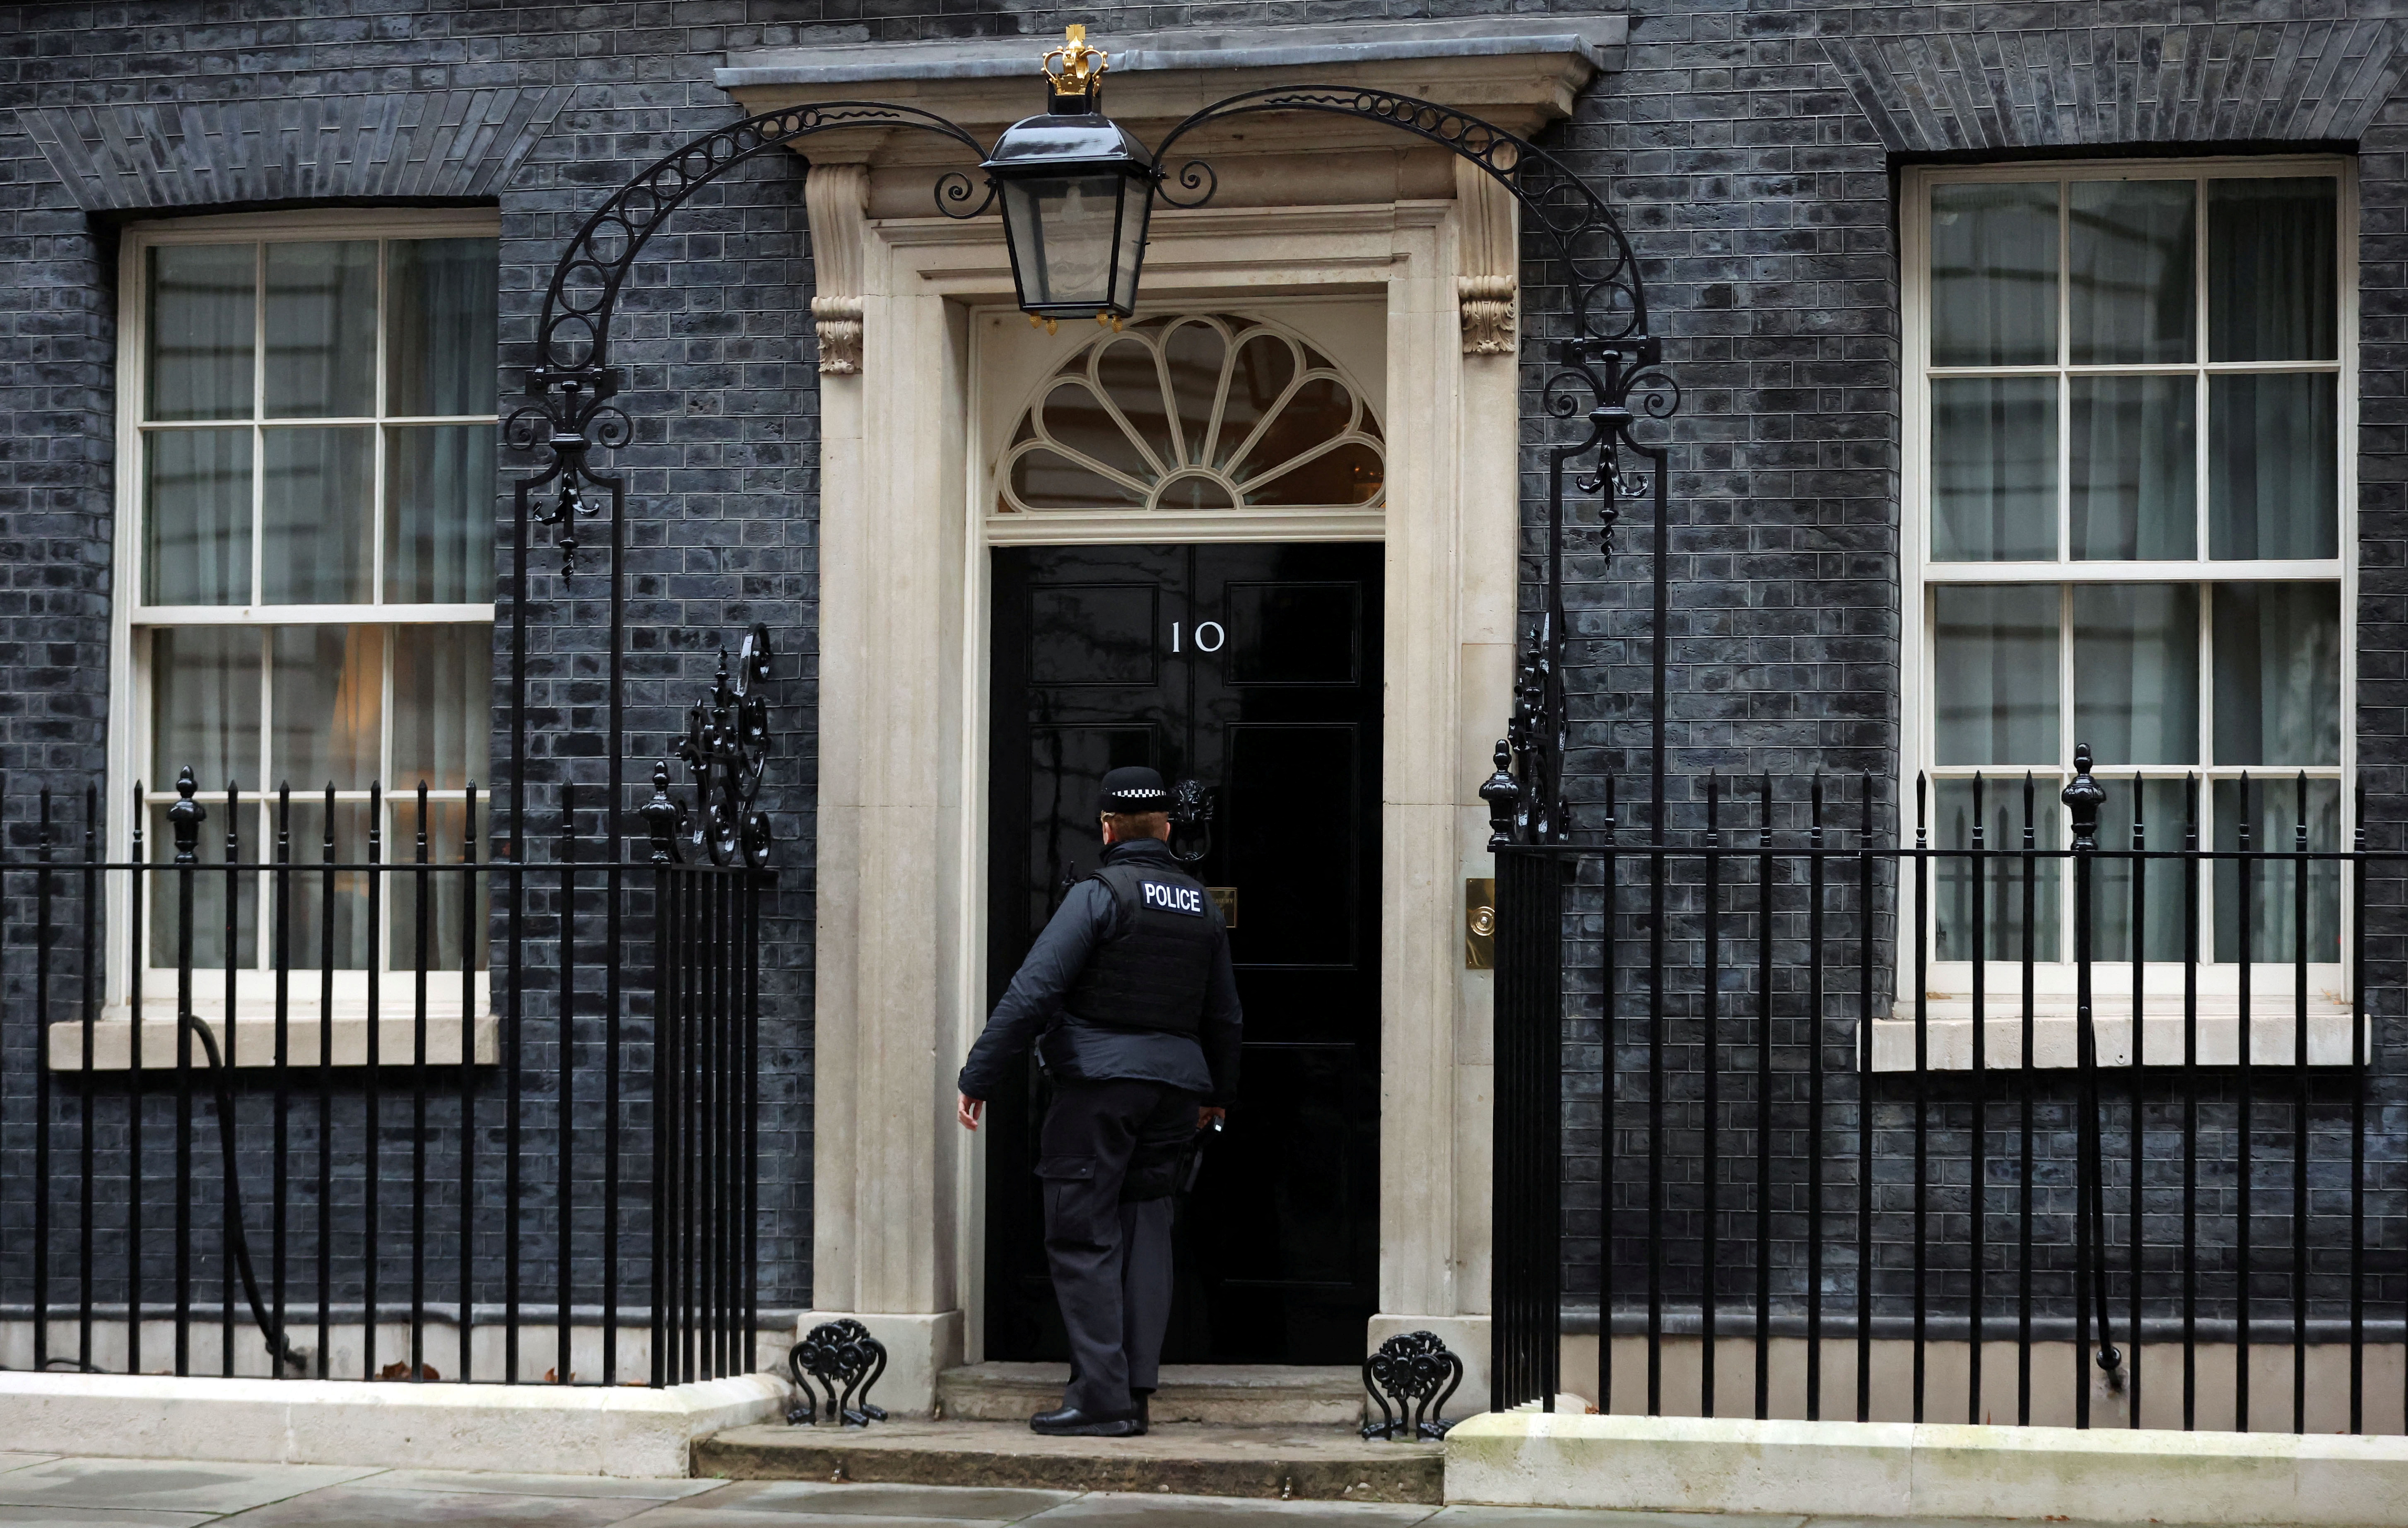 A police officer knocks on the door of Downing Street in London, Britain, January 11, 2022. REUTERS/Hannah McKay